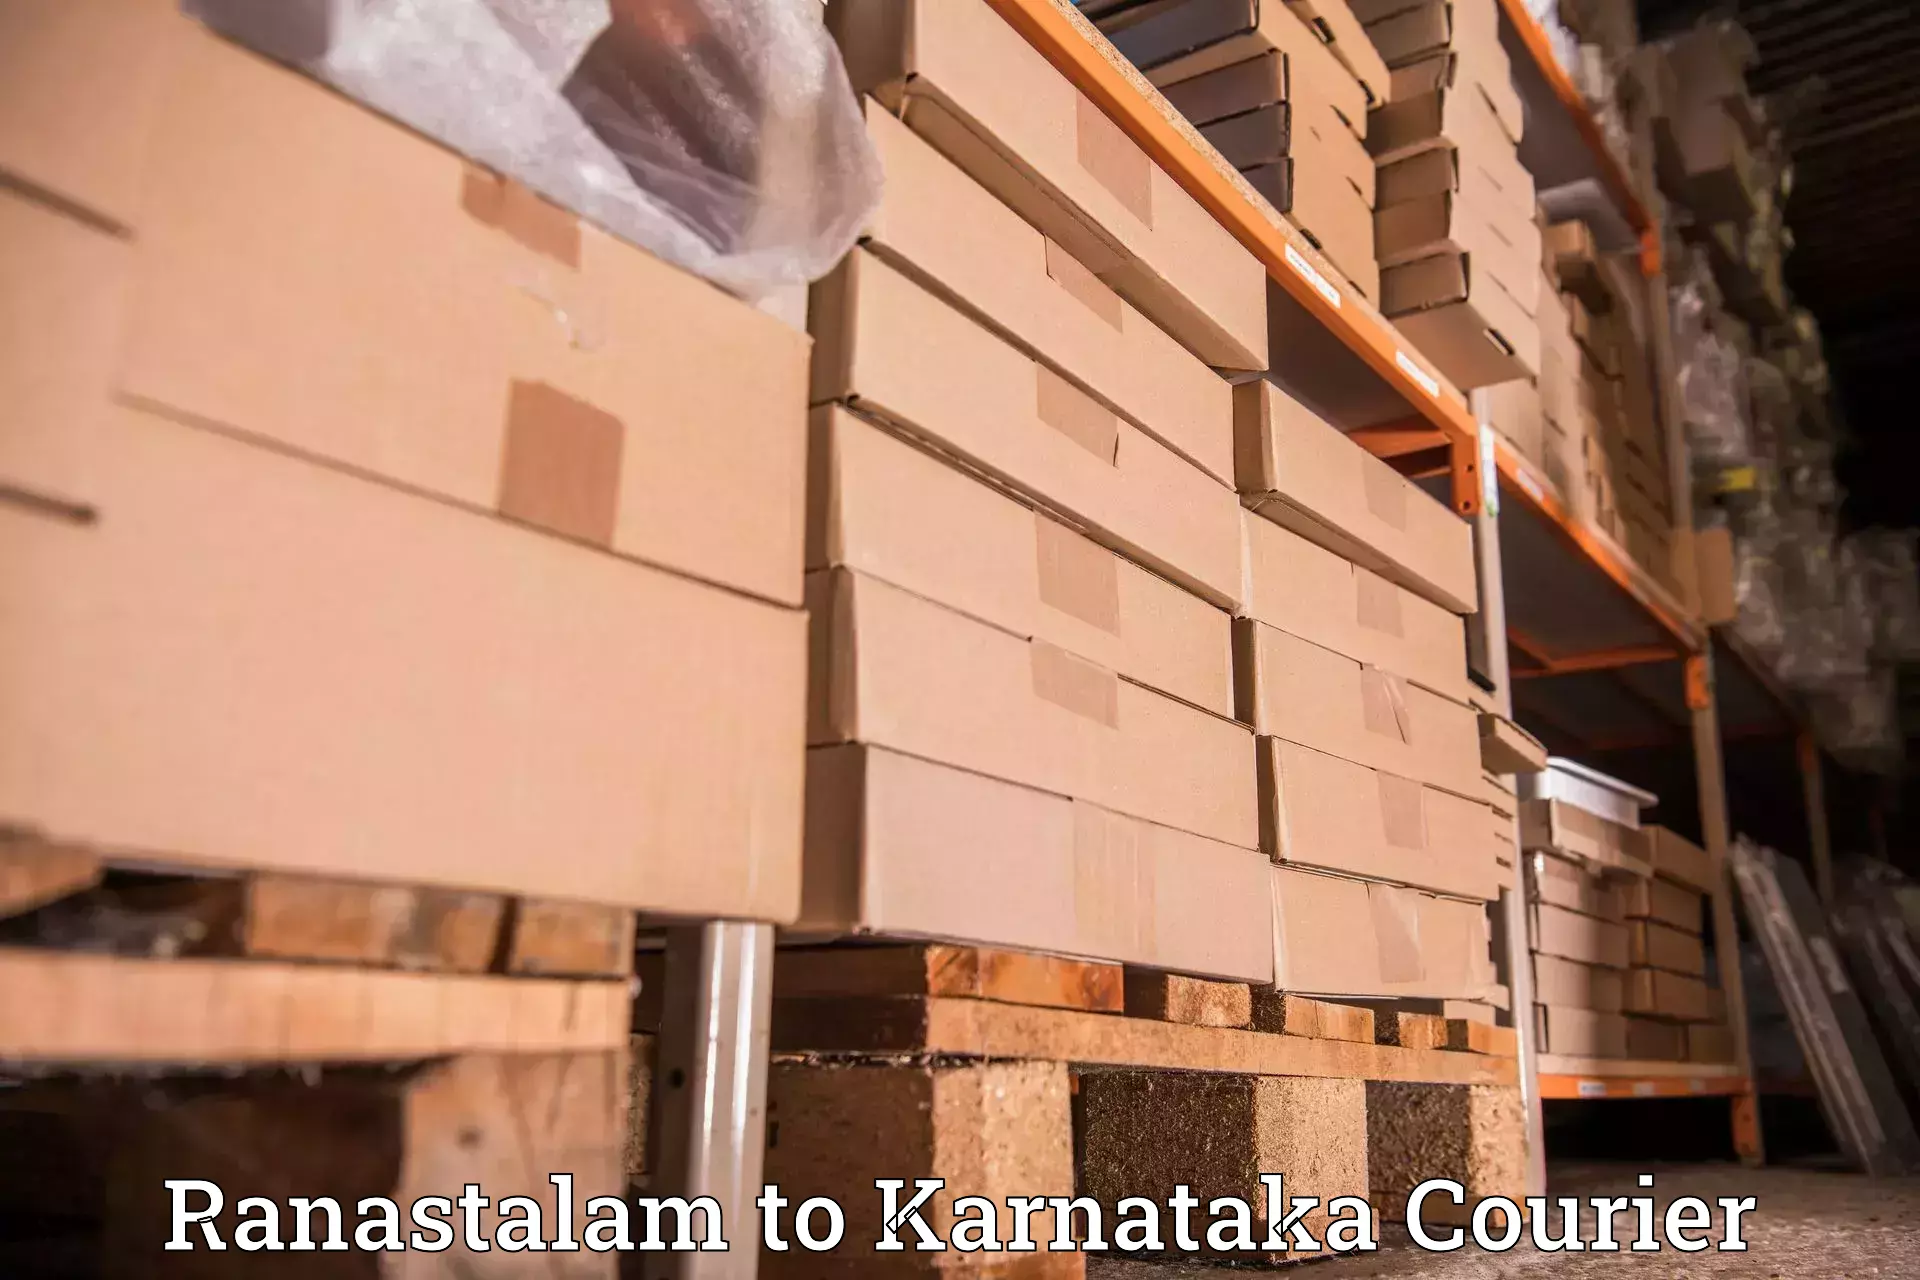 State-of-the-art courier technology Ranastalam to Chikkamagaluru